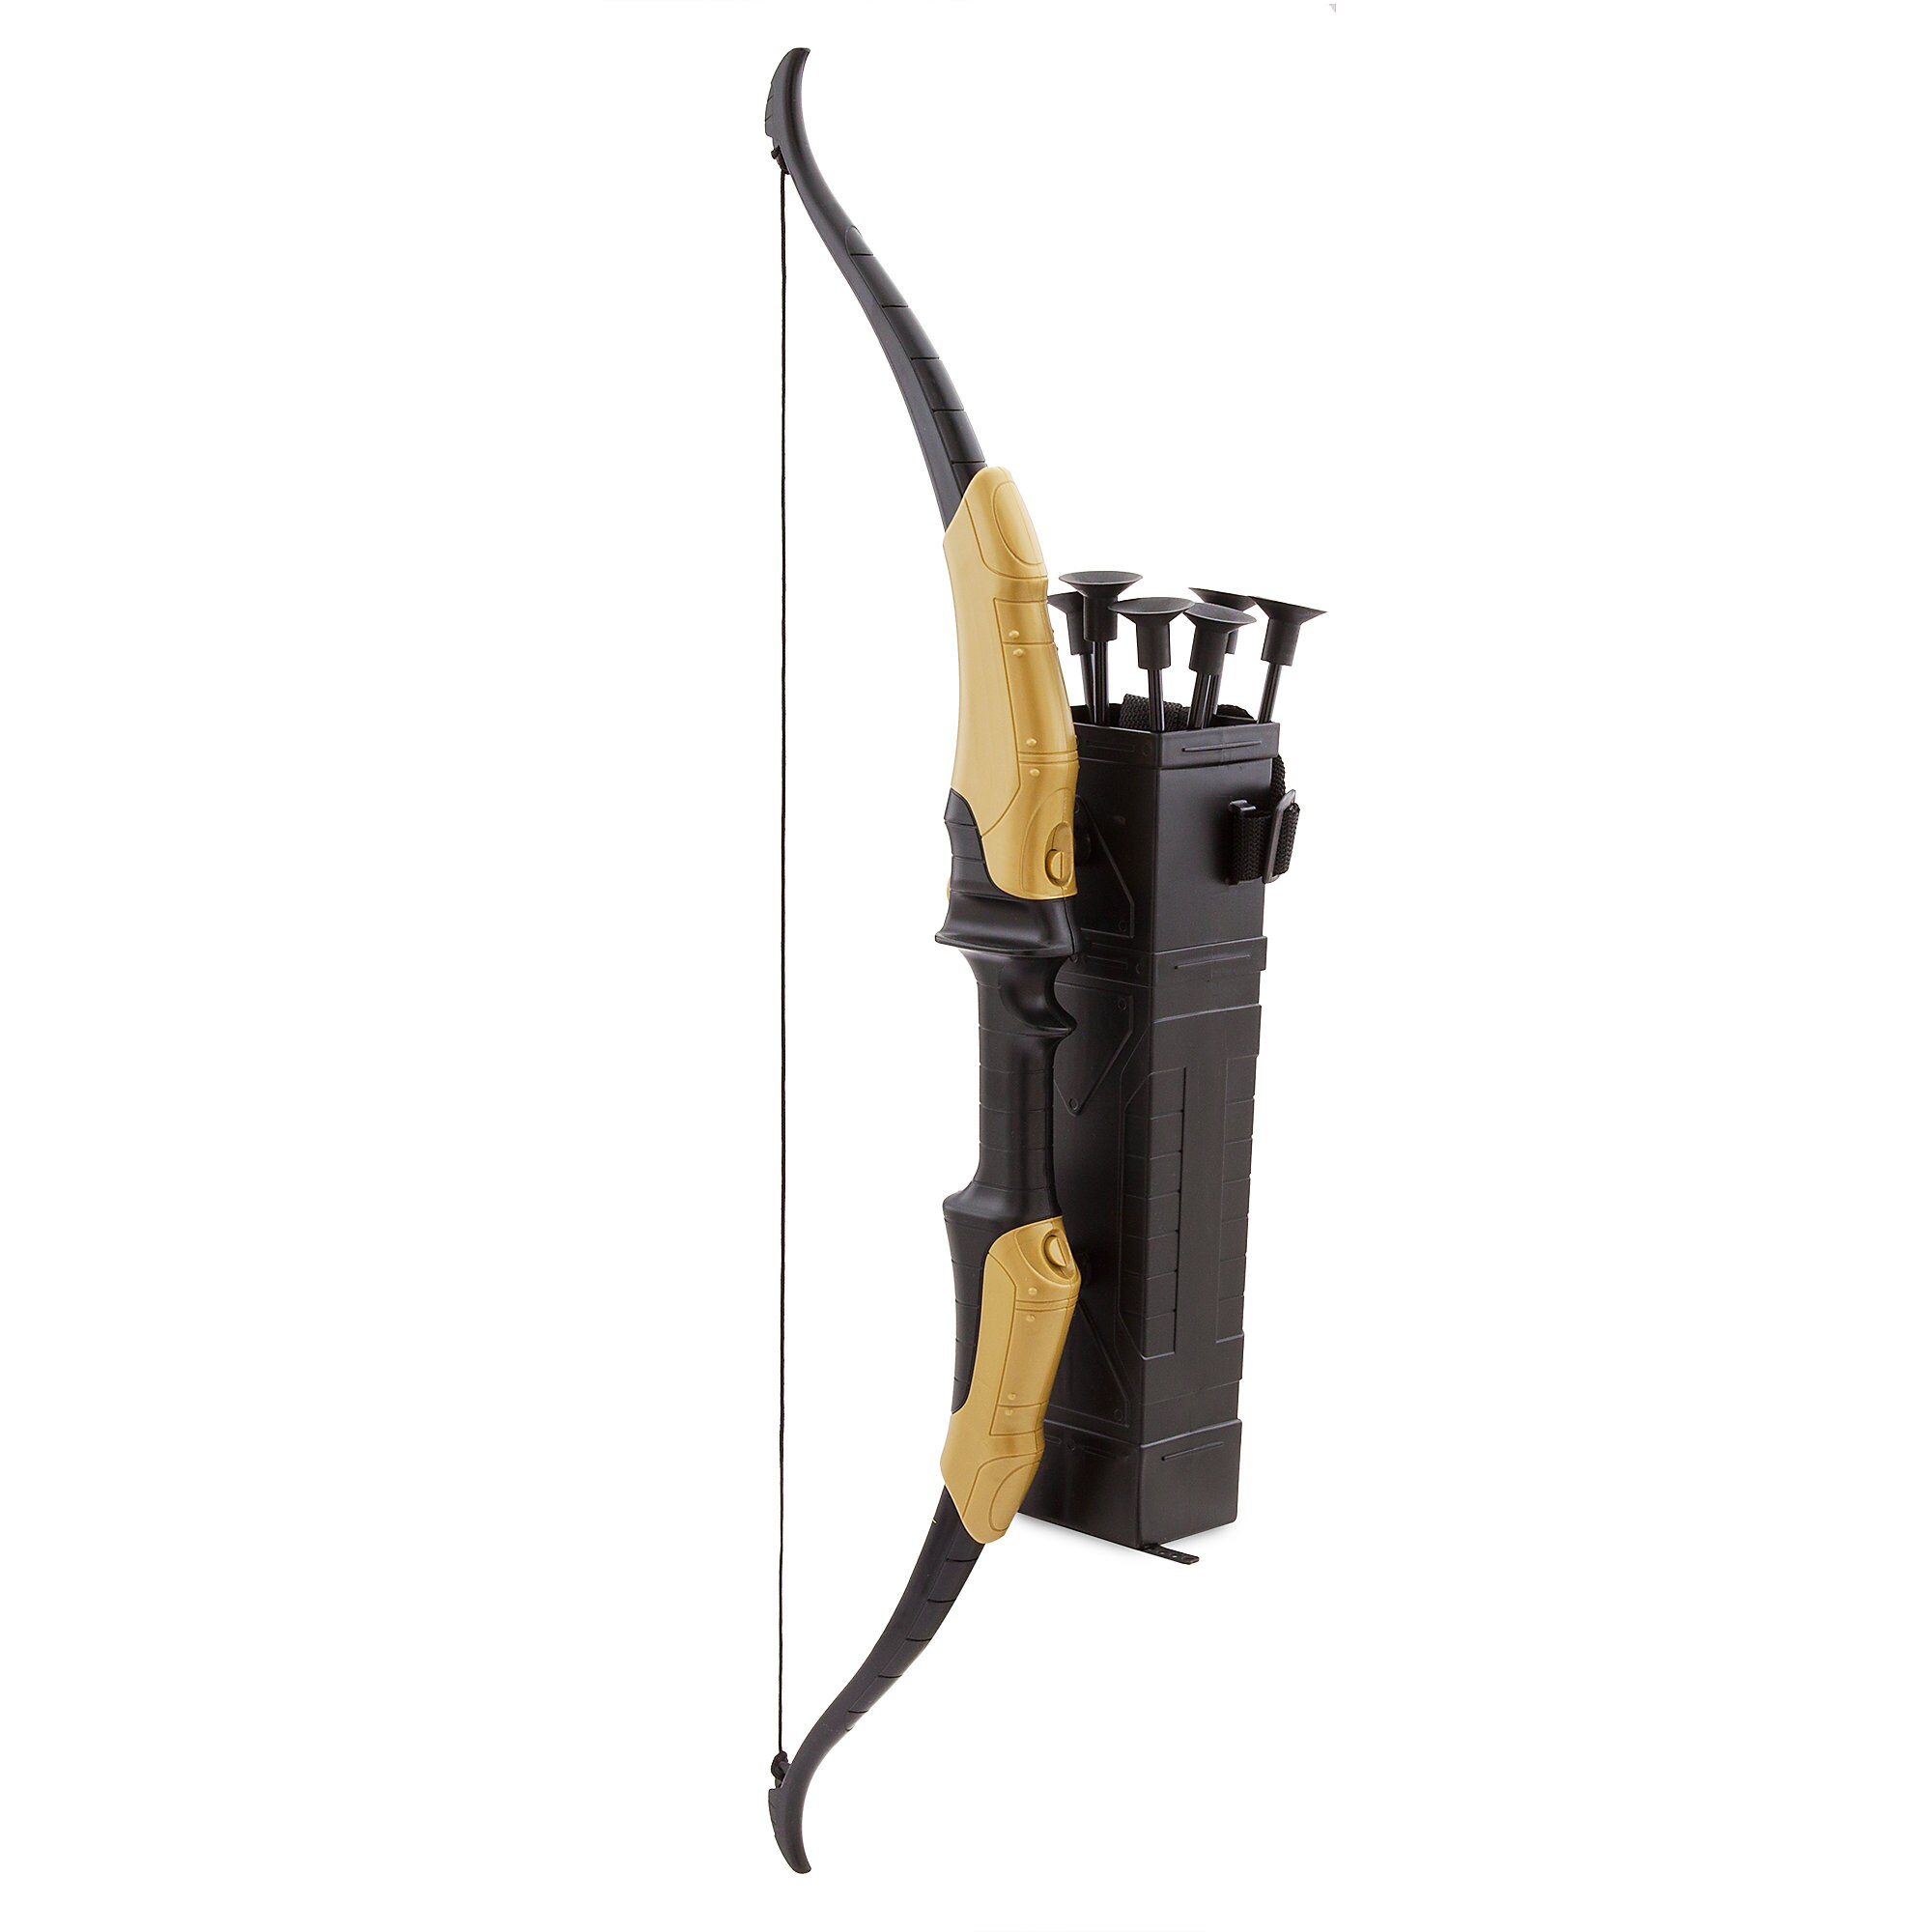 Marvel's Avengers: Endgame Deluxe Hawkeye Quiver, Bow and Arrow Set